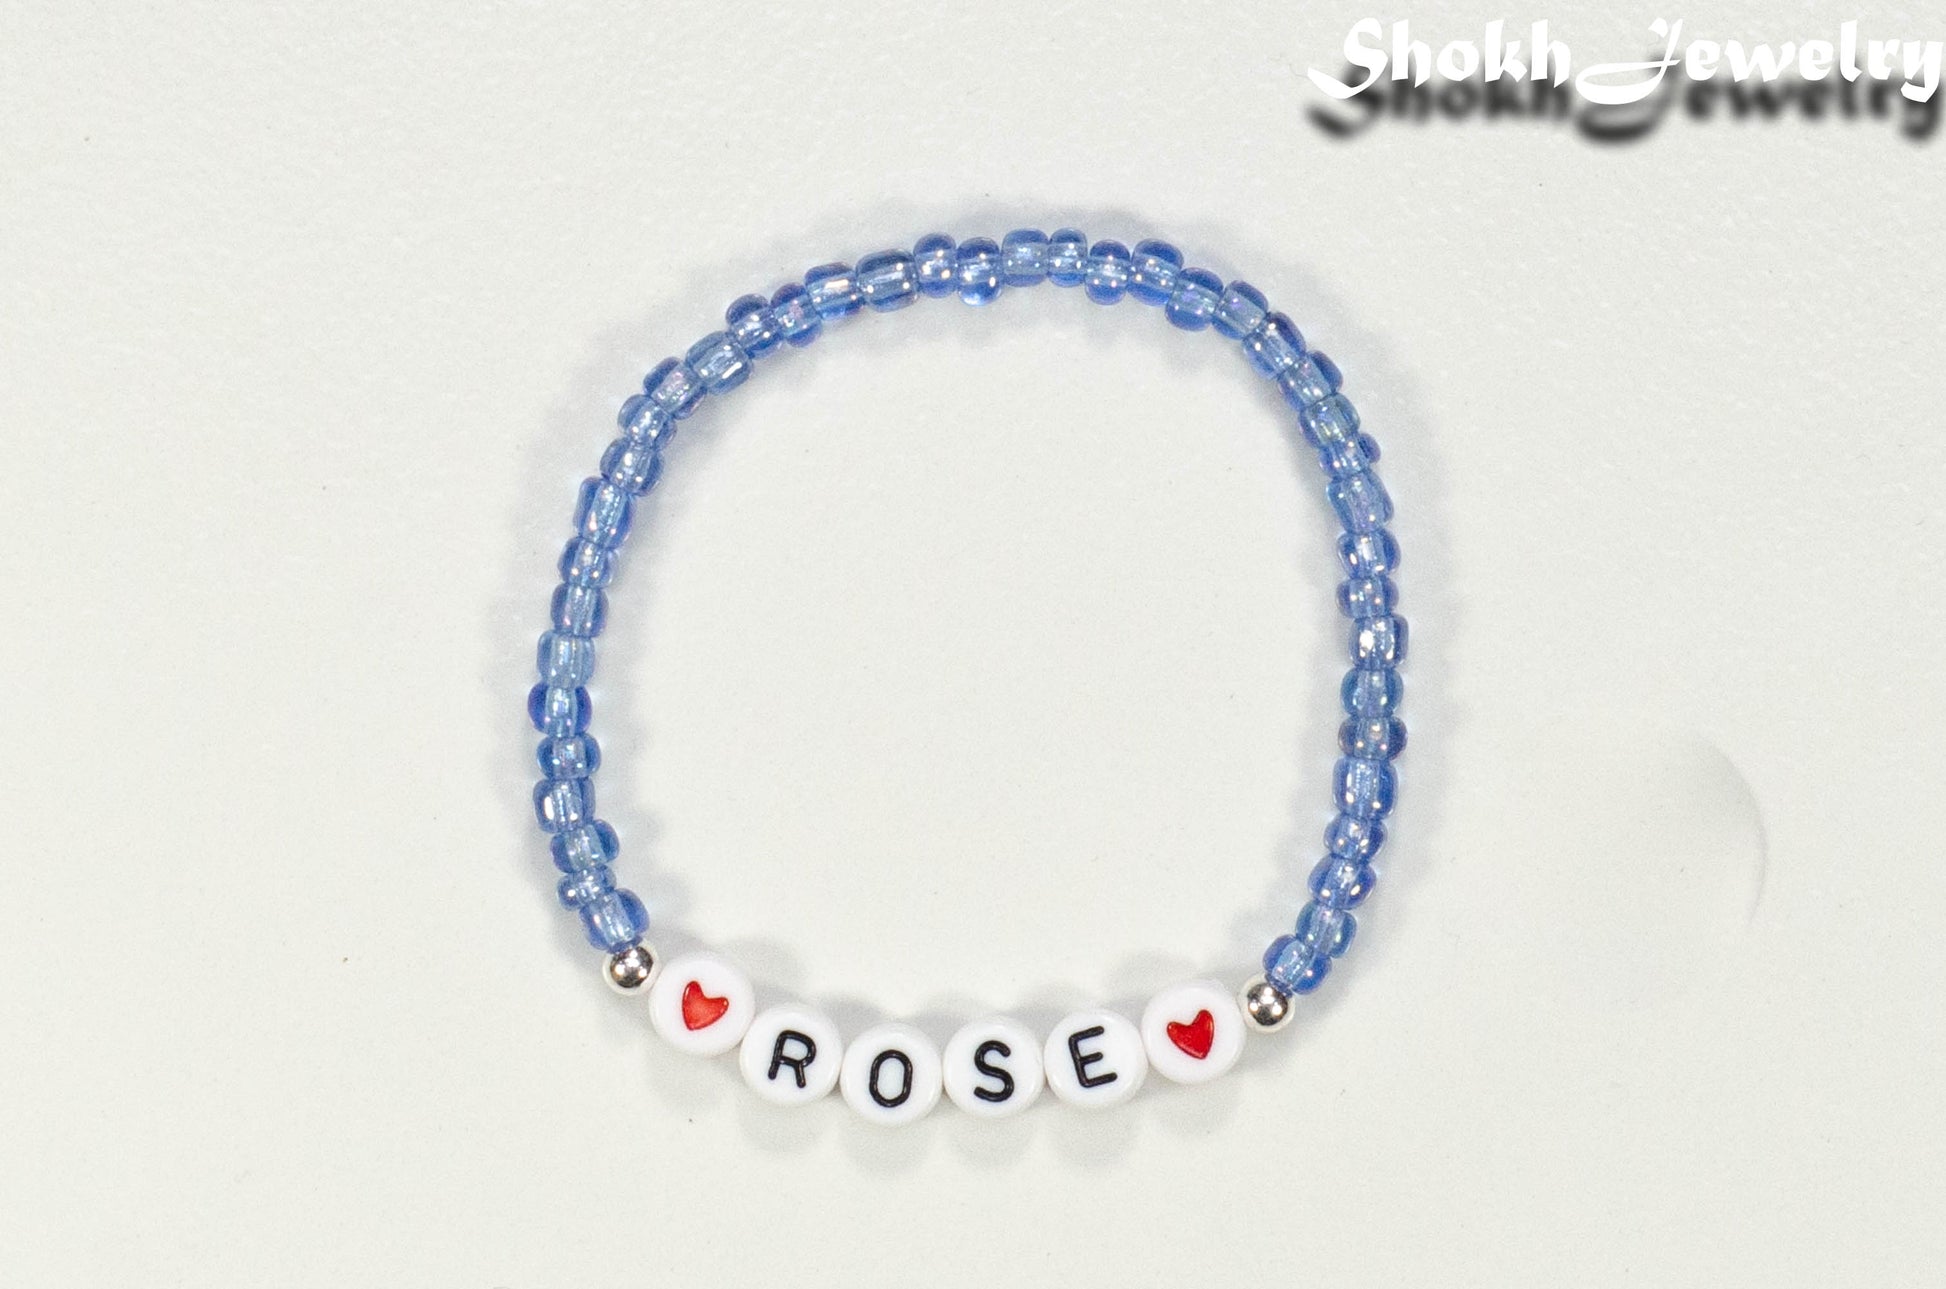 Top view of Sky Blue Seed Beads Name Bracelet.